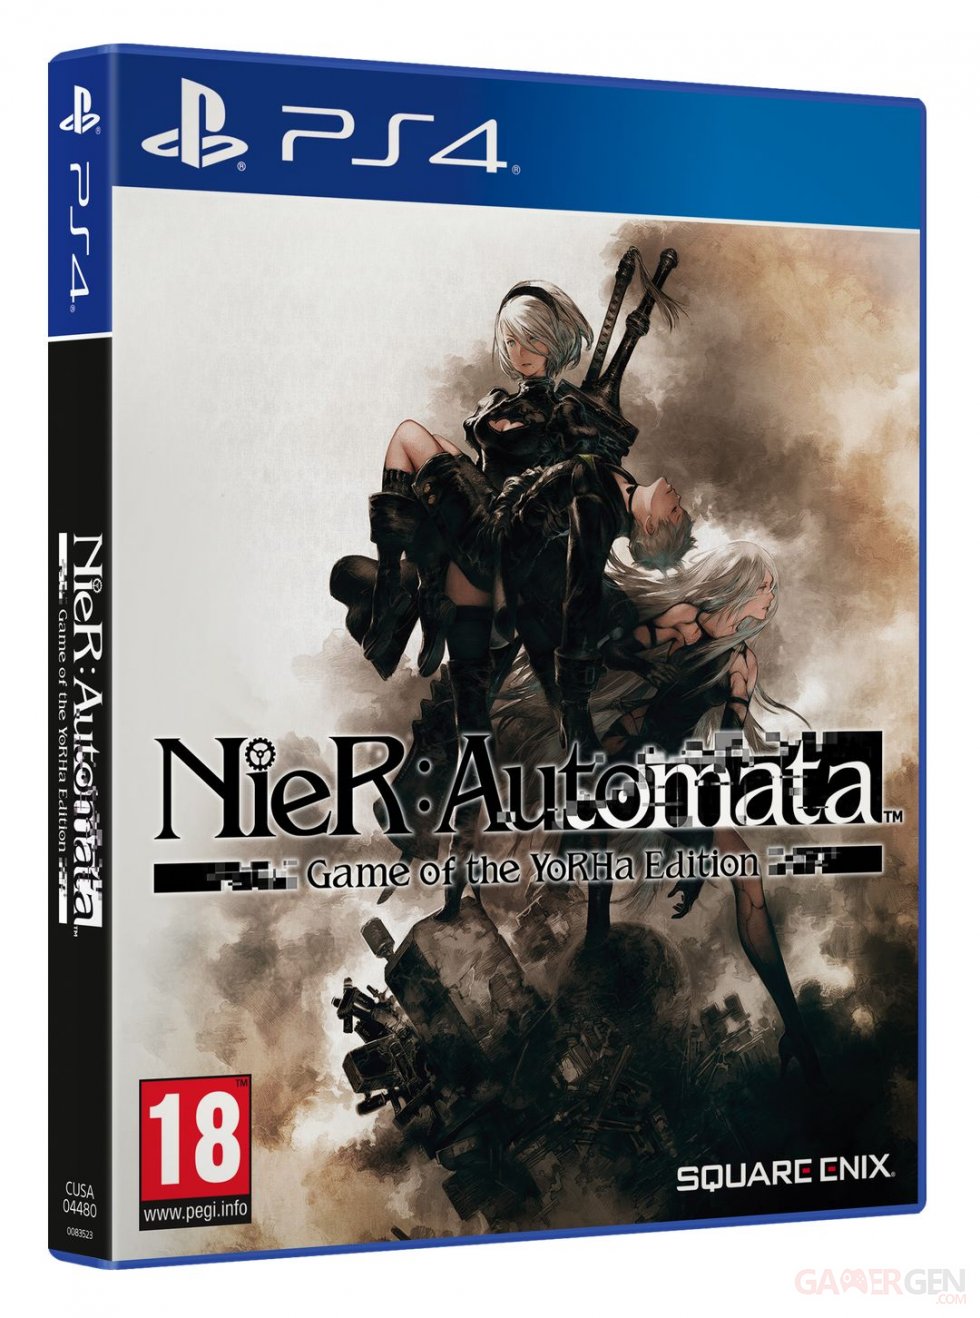 NieR-Automata-Game-of-the-YoRHa-Edition-jaquette-Europe-02-11-12-2018